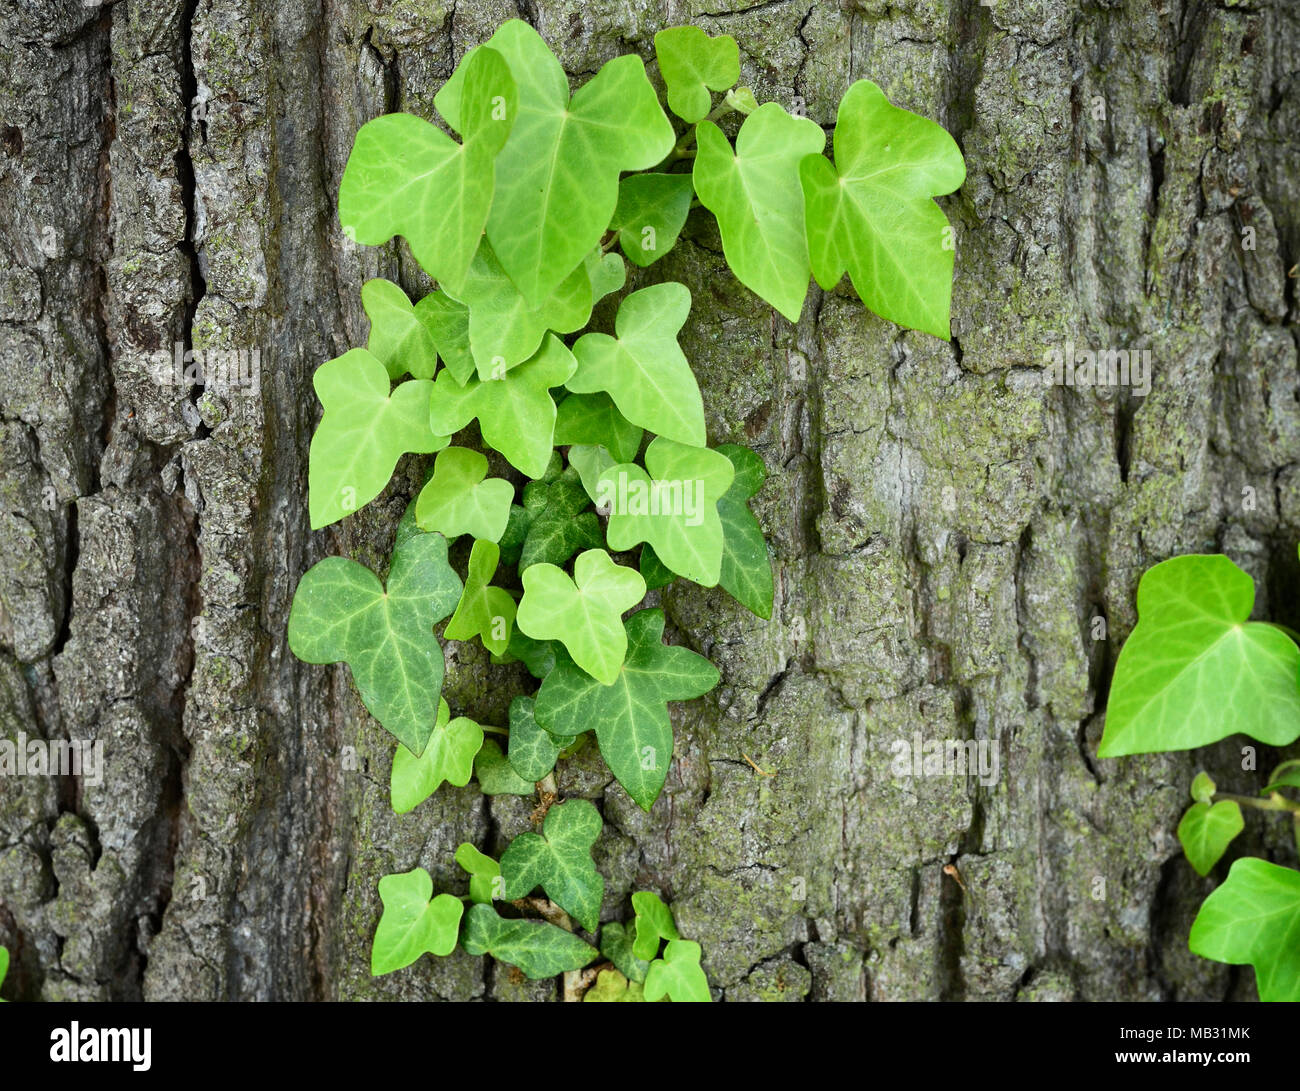 Growing or climbing ivy on a tree trunk, closeup shot with copy space. Stock Photo